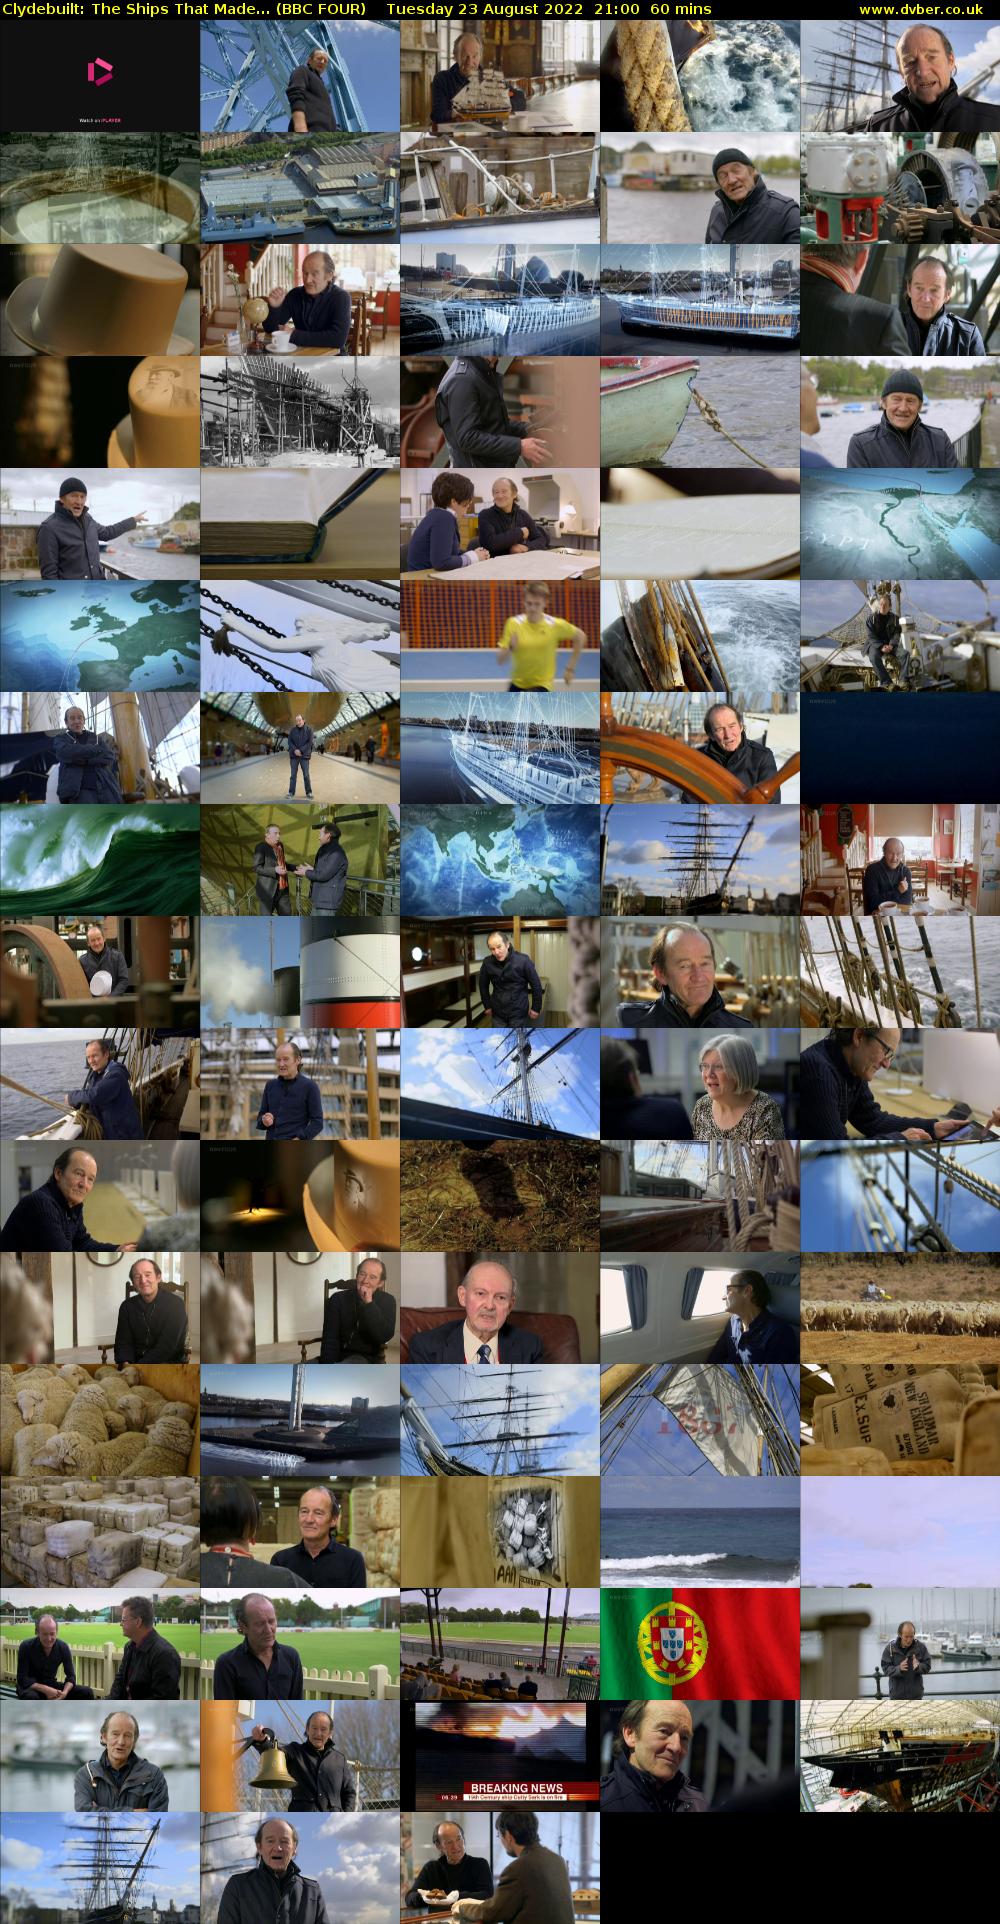 Clydebuilt: The Ships That Made... (BBC FOUR) Tuesday 23 August 2022 21:00 - 22:00